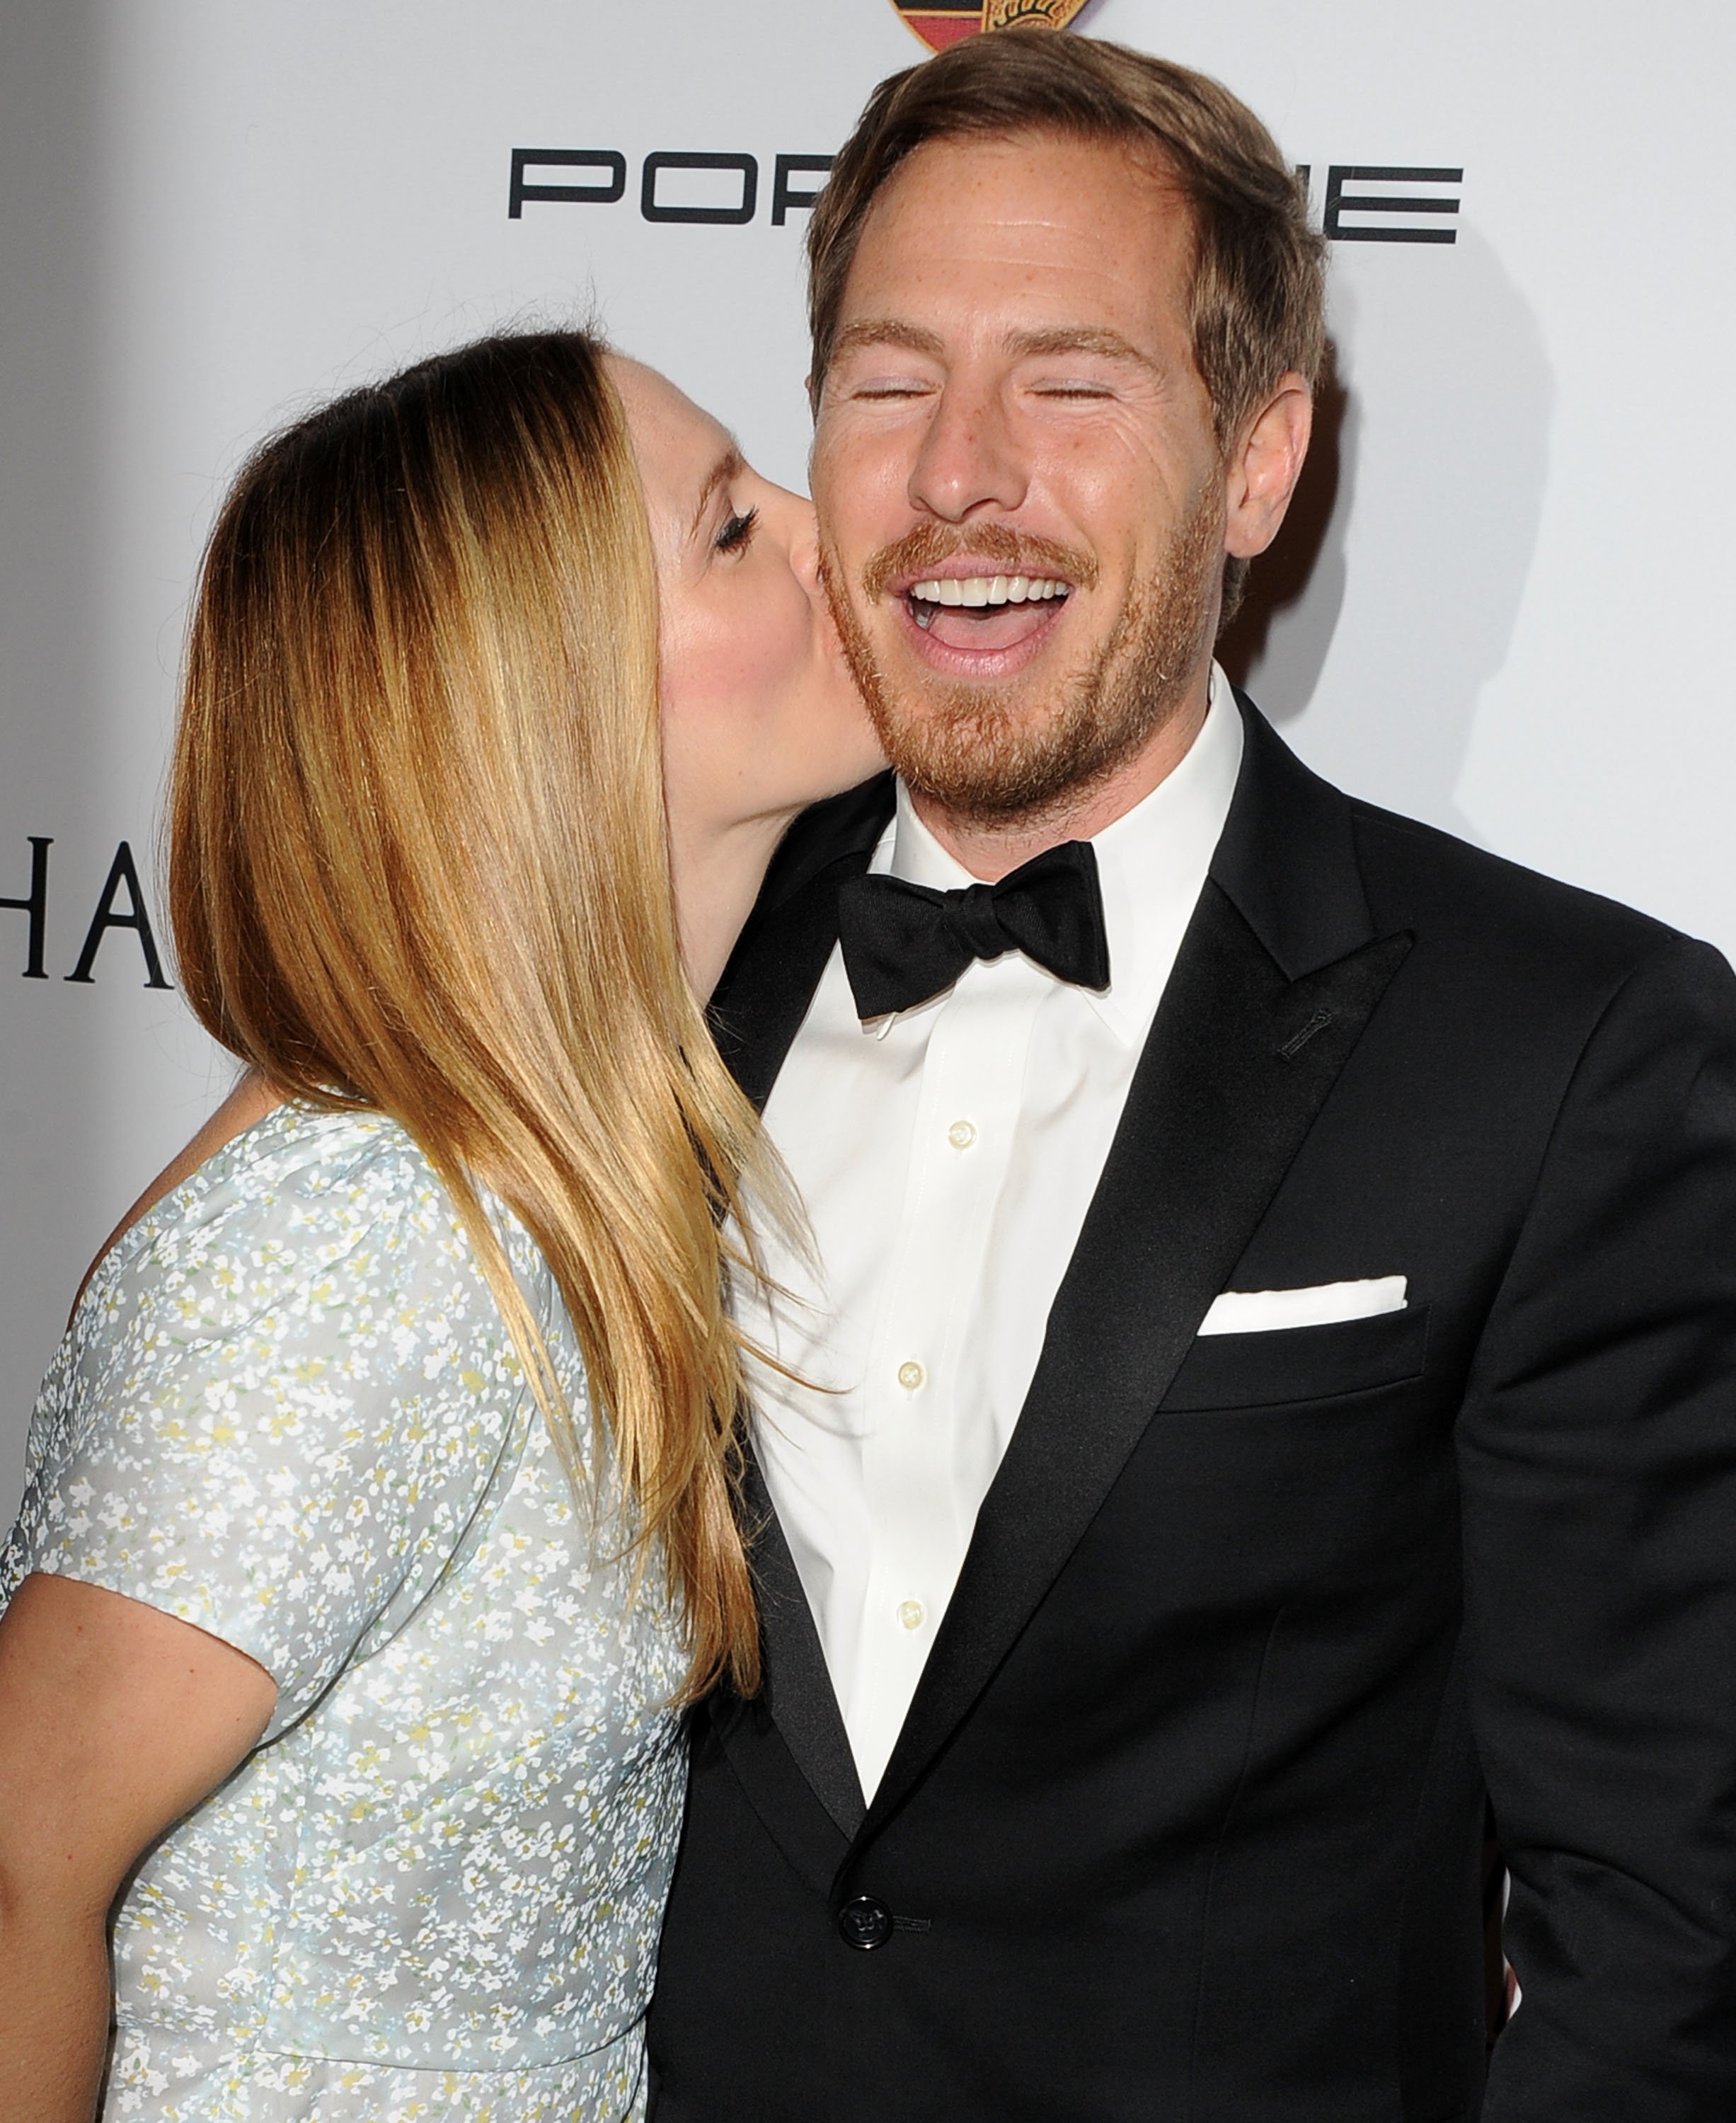 Drew Barrymore and Will Kopelman arrive at the 2nd Annual Baby2Baby Gala at The Book Bindery on November 9, 2013 in Culver City, California.  / Source: Getty Images